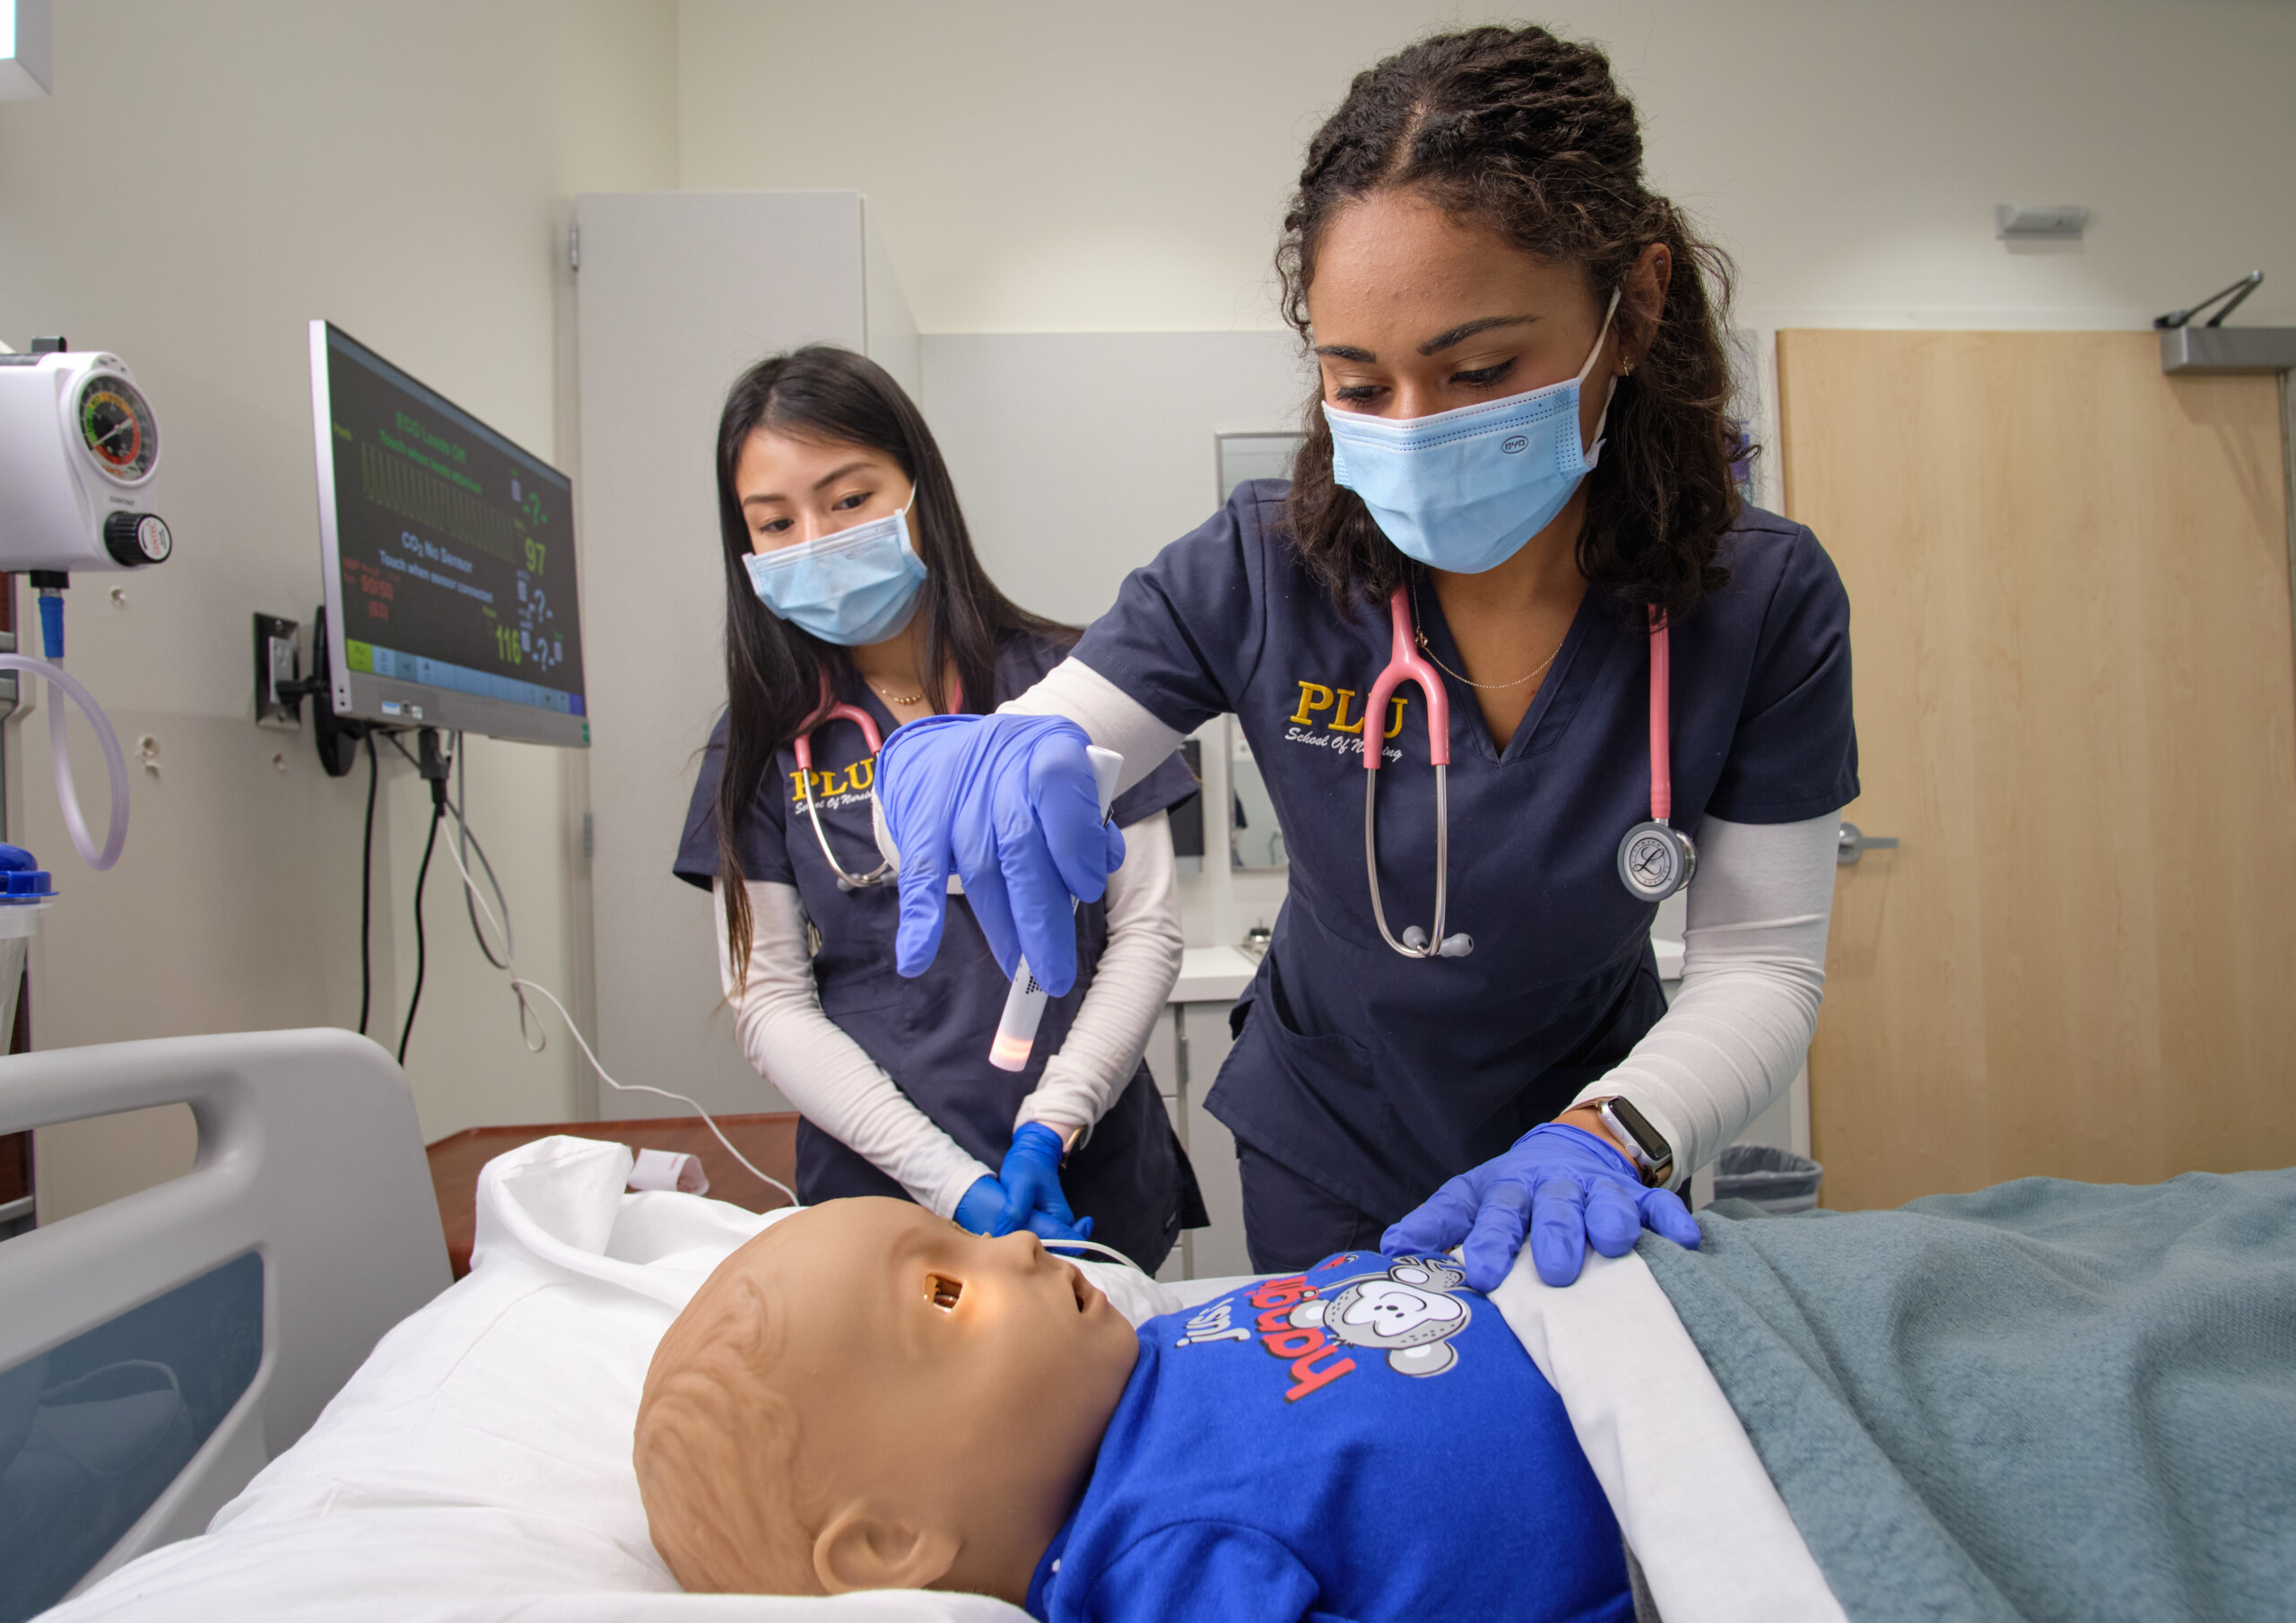 Two PLU nursing students wearing scrubs and facebooks practice a procedure on a child nursing education dummy.